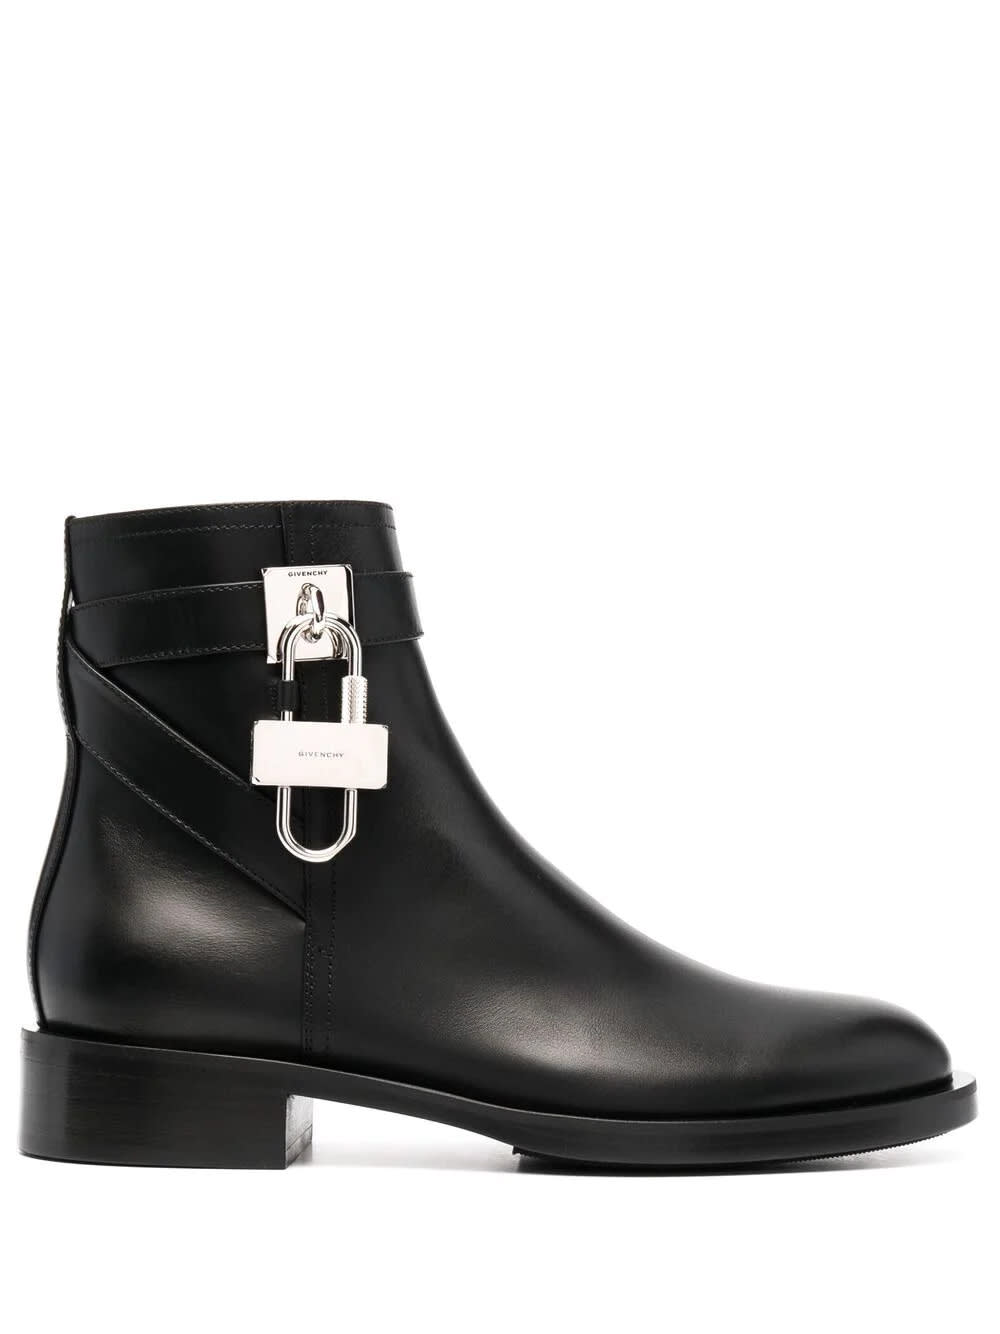 Givenchy Woman Lock Ankle Boot In Black Leather